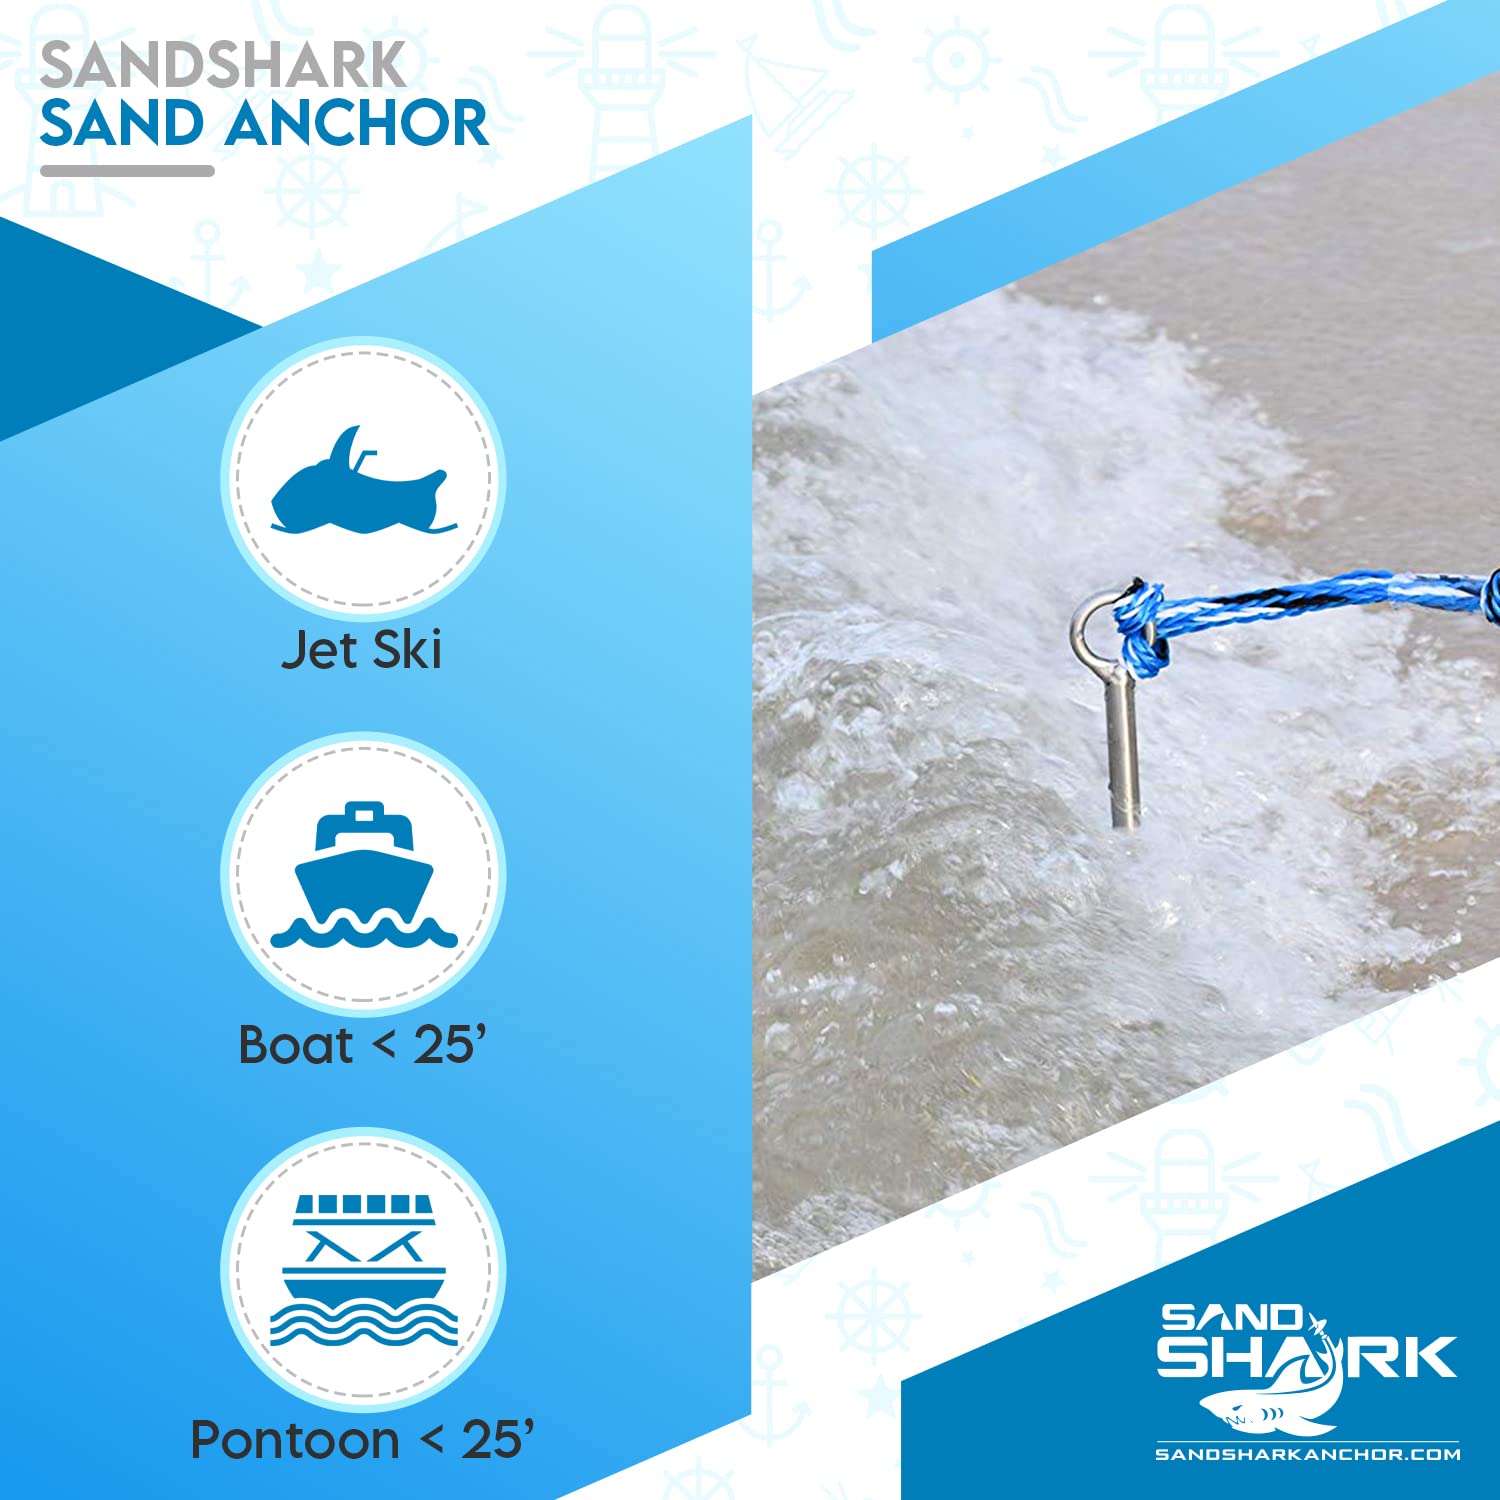 SandShark 18 inch Lite Series Boat Anchor - Shallow Water Anchor Pole - Jet Ski Anchor, Kayak Anchor, Pontoon Boat Accessories for Beach and Sandbar - Stainless Steel w/Handle and Rip-Stop Padded Case